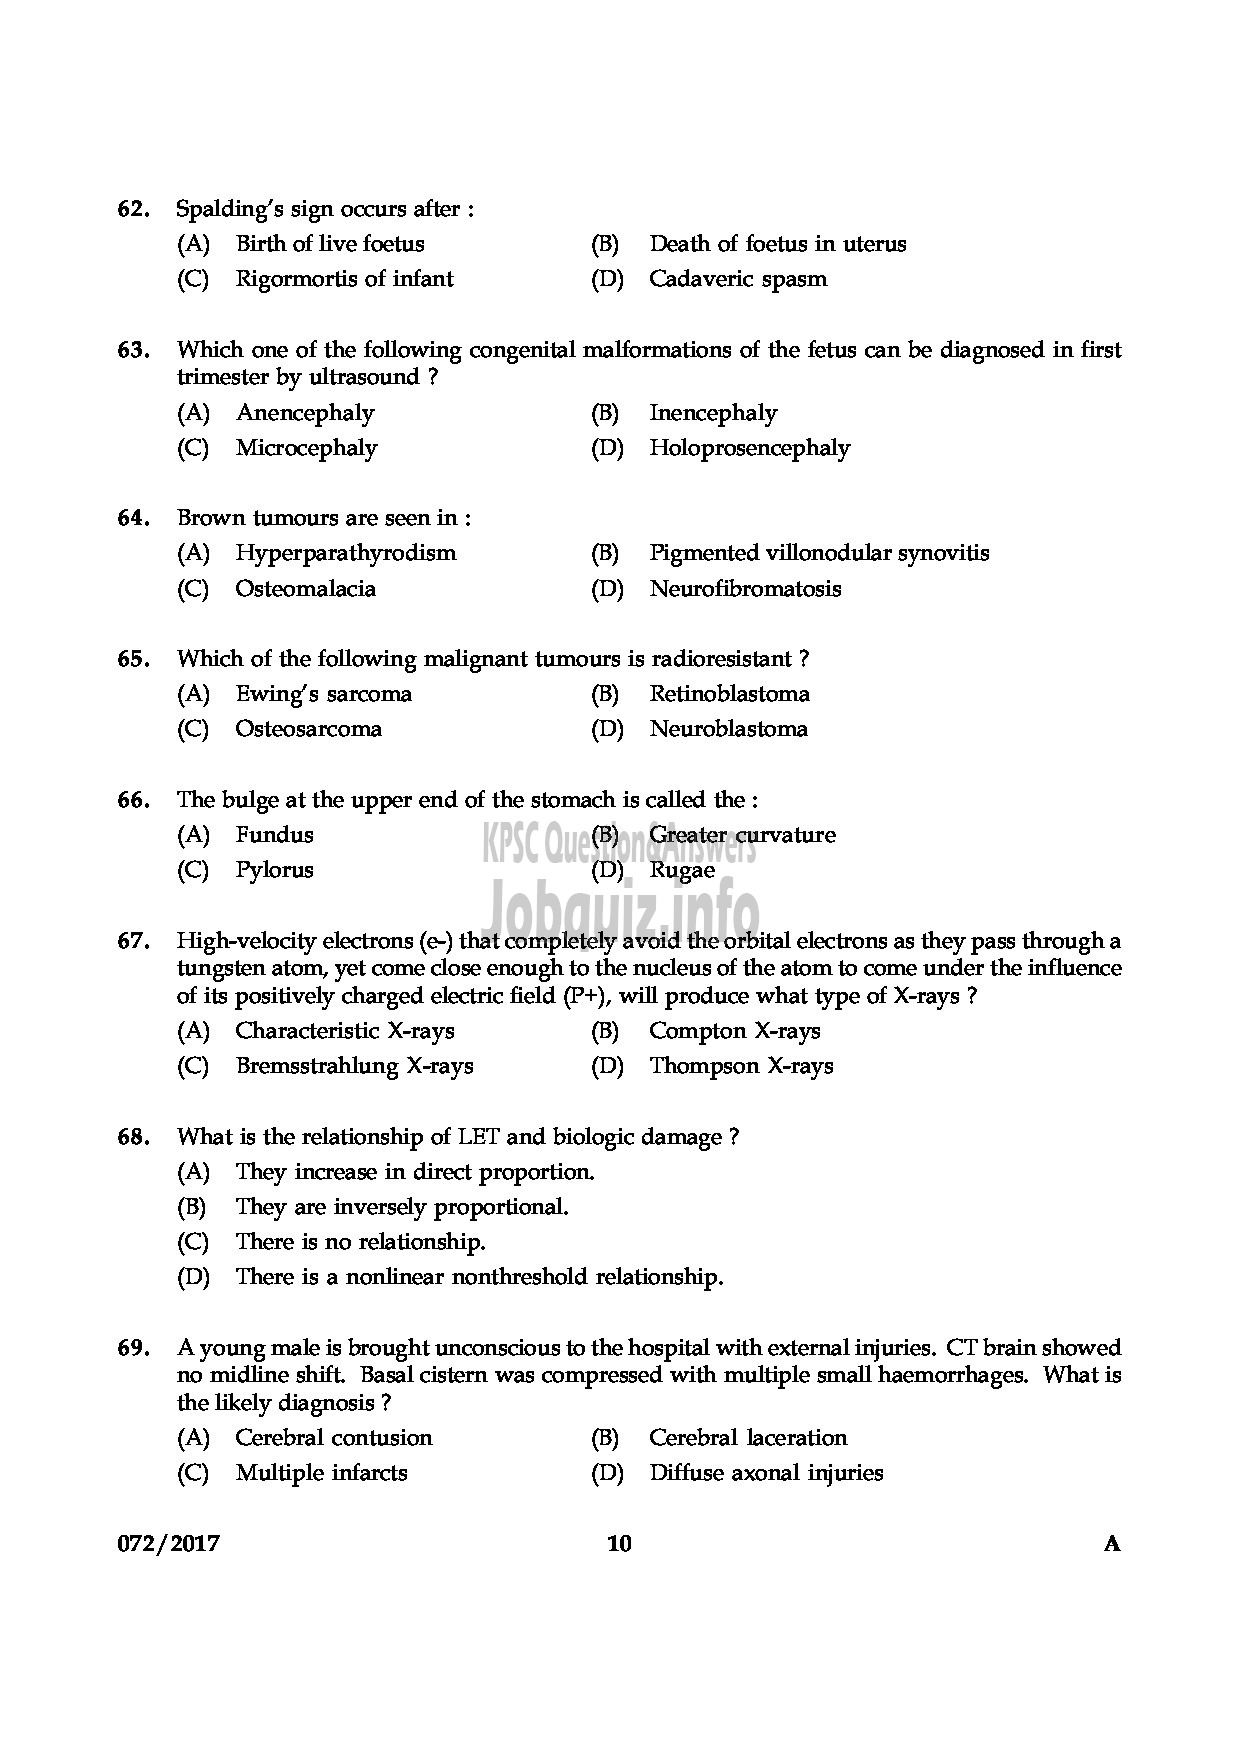 Kerala PSC Question Paper - RADIOGRAPHER GR.II HEALTH SERVICES QUESTION PAPER-9